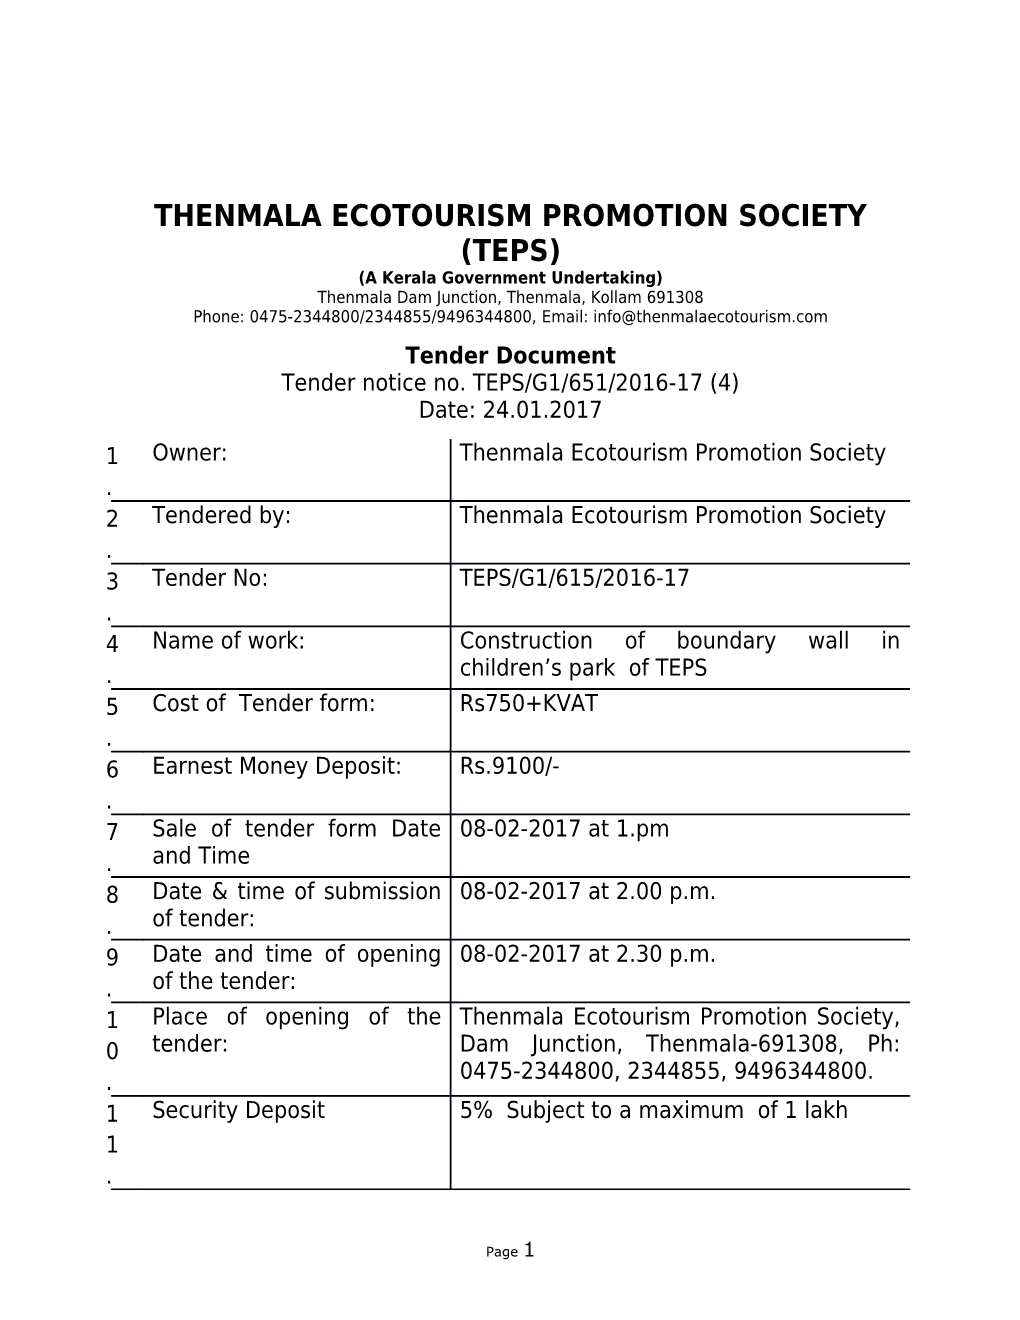 Thenmala Ecotourism Promotion Society (Teps) s1